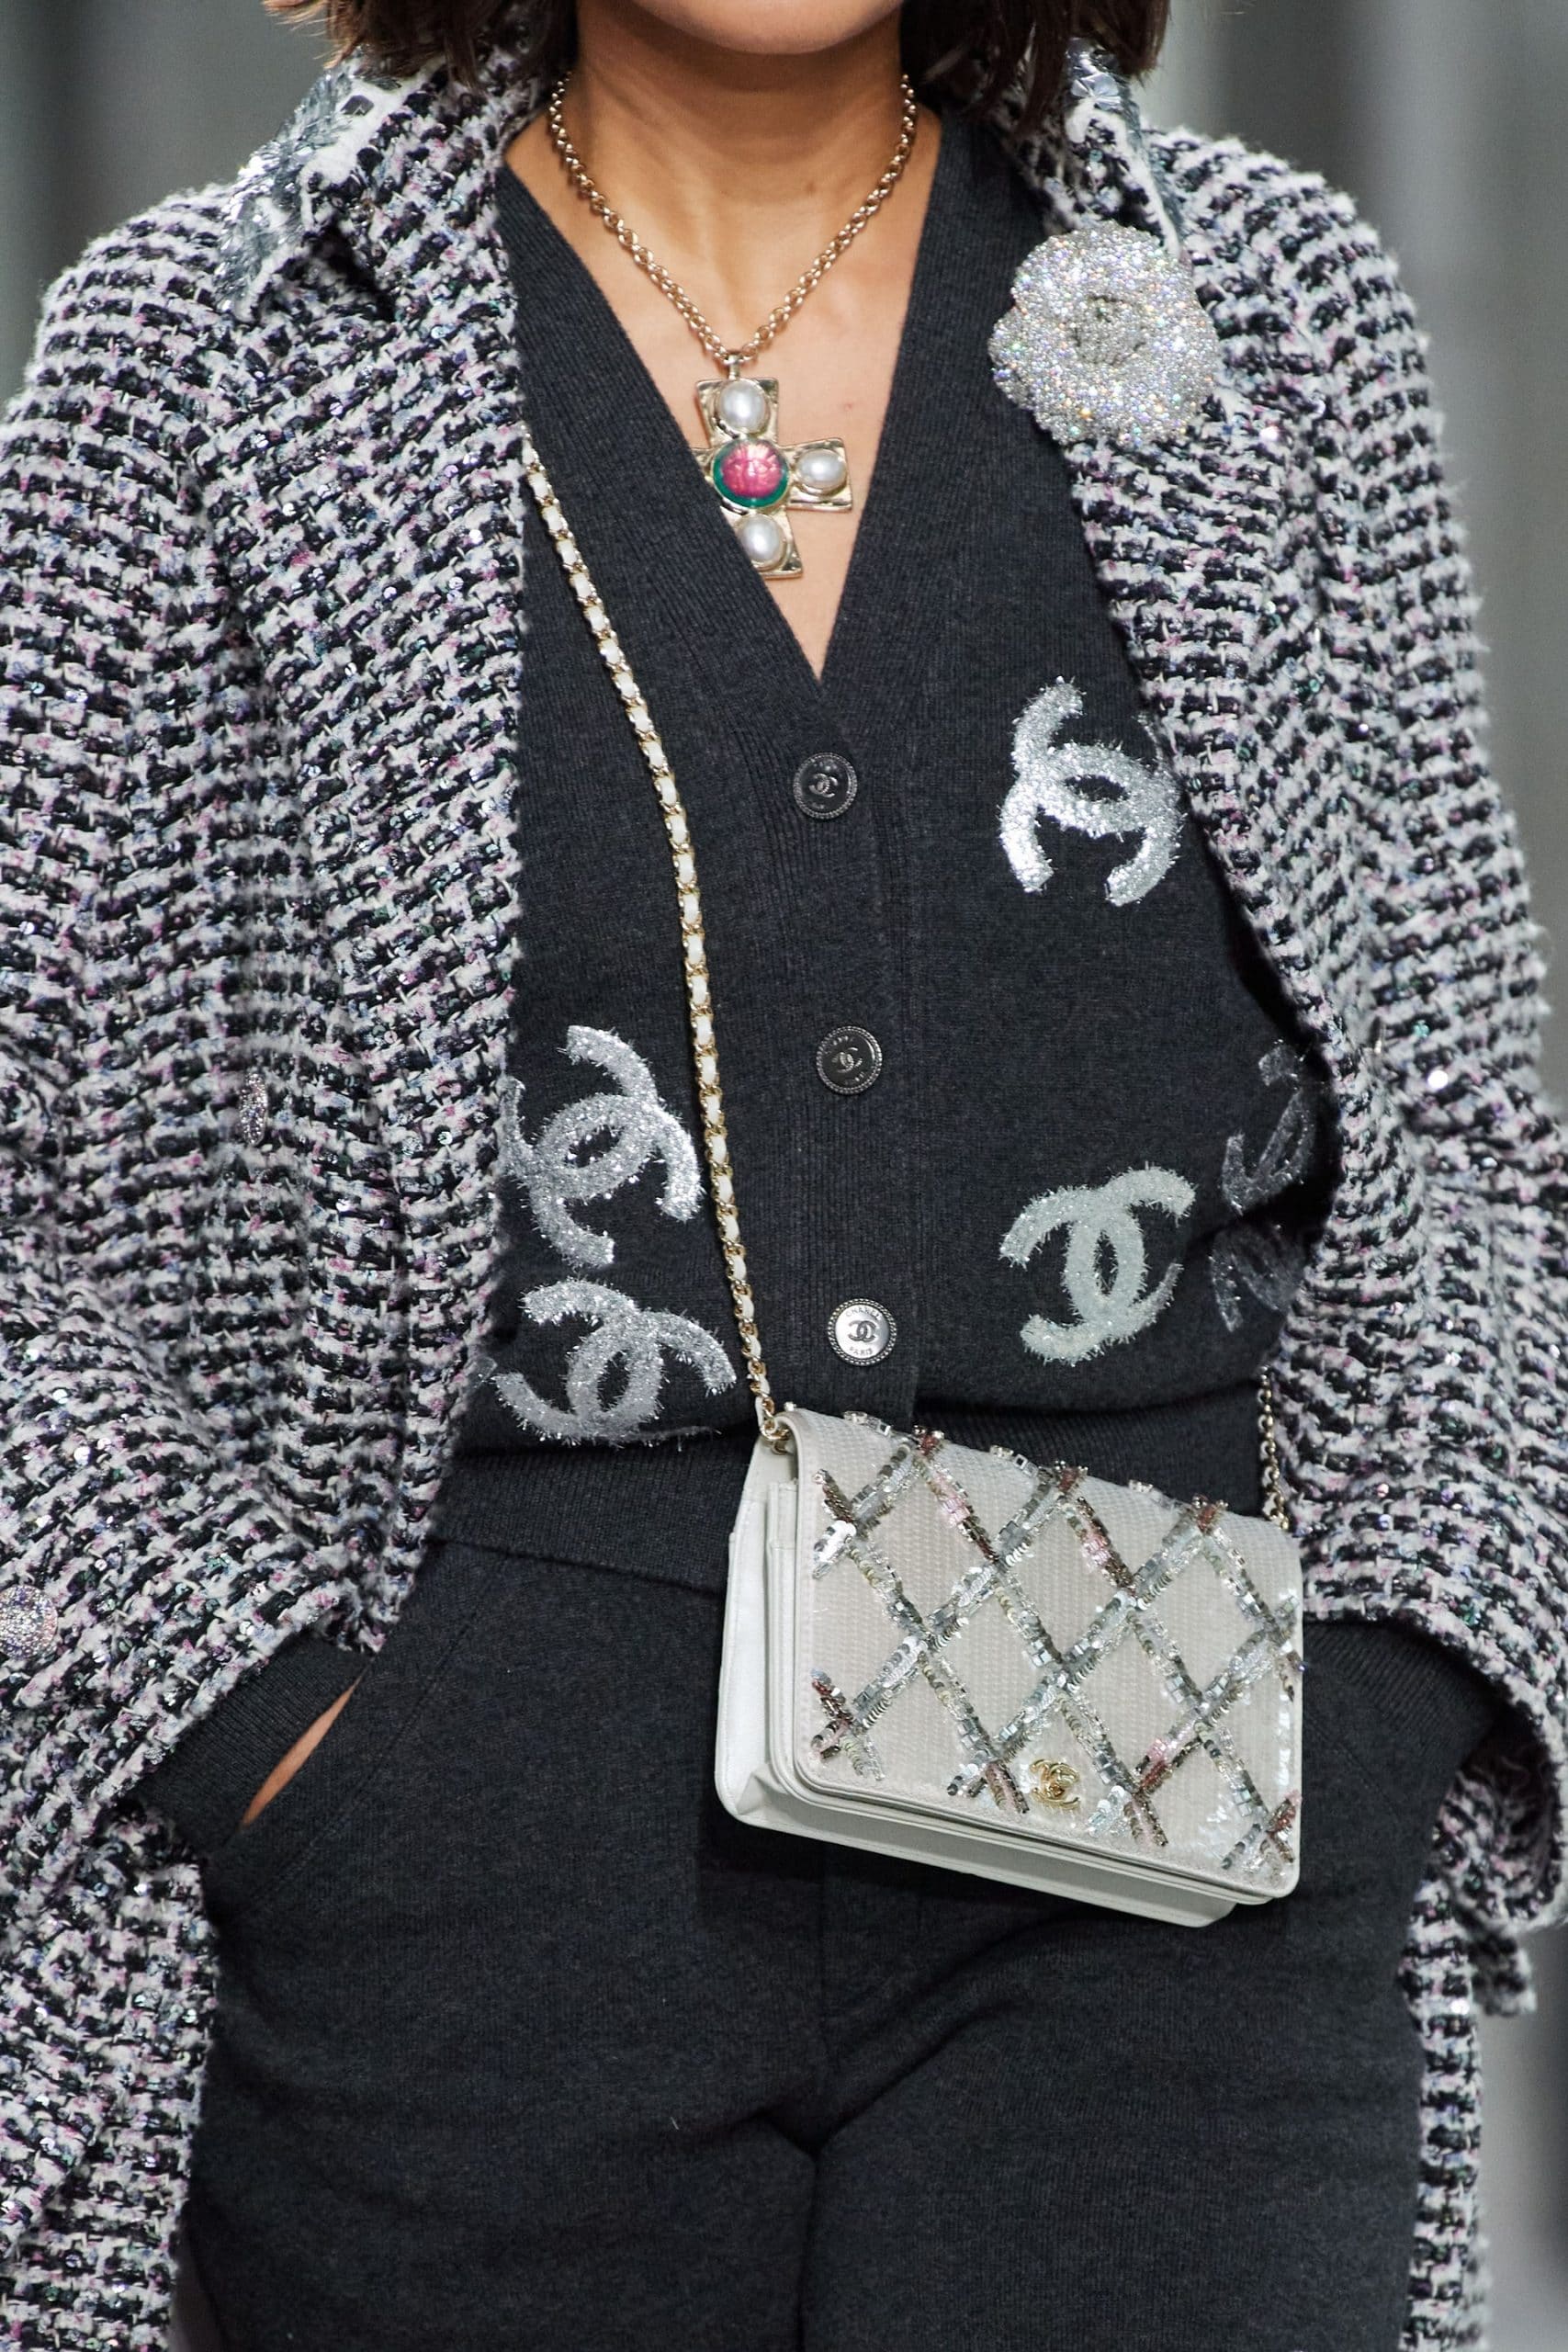 A Look Into Chanel Métiers d'Art Pre-Fall 2022 - Spotted Fashion